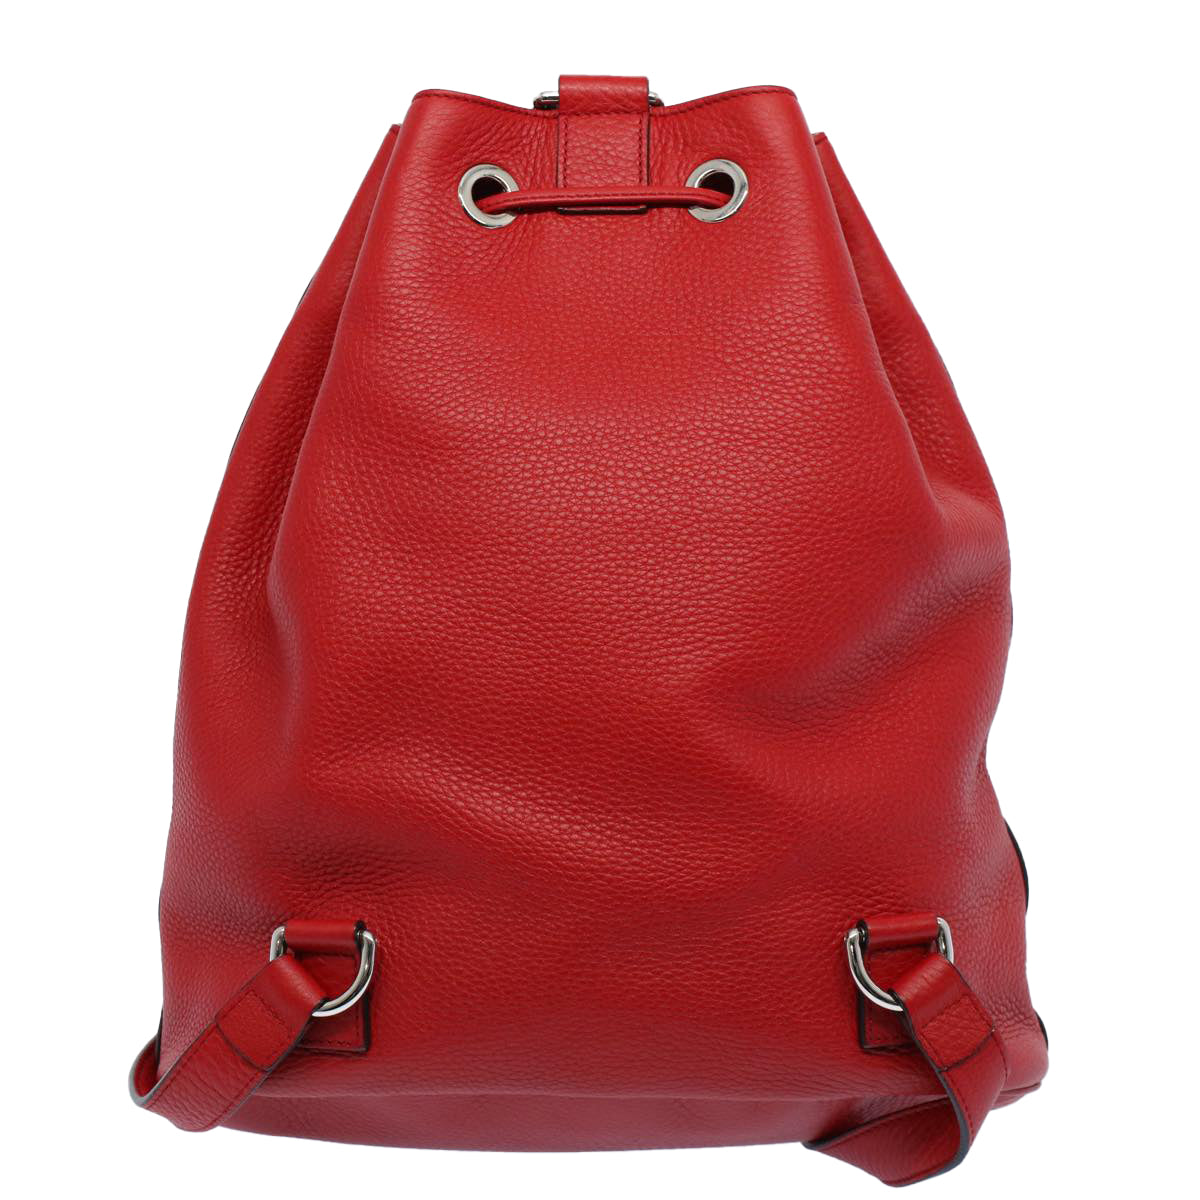 Gucci Soho Backpack Leather Red 368588 Auth Fm2801